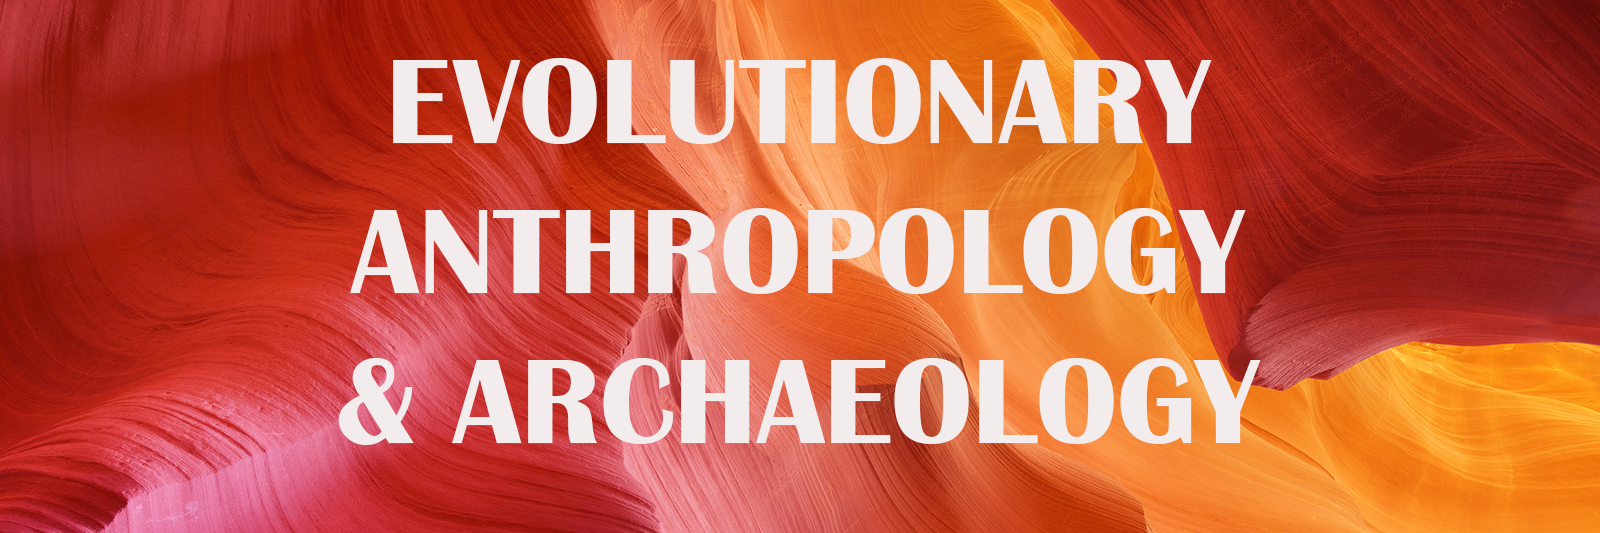 Evolutionary Anthropology and Archaeology